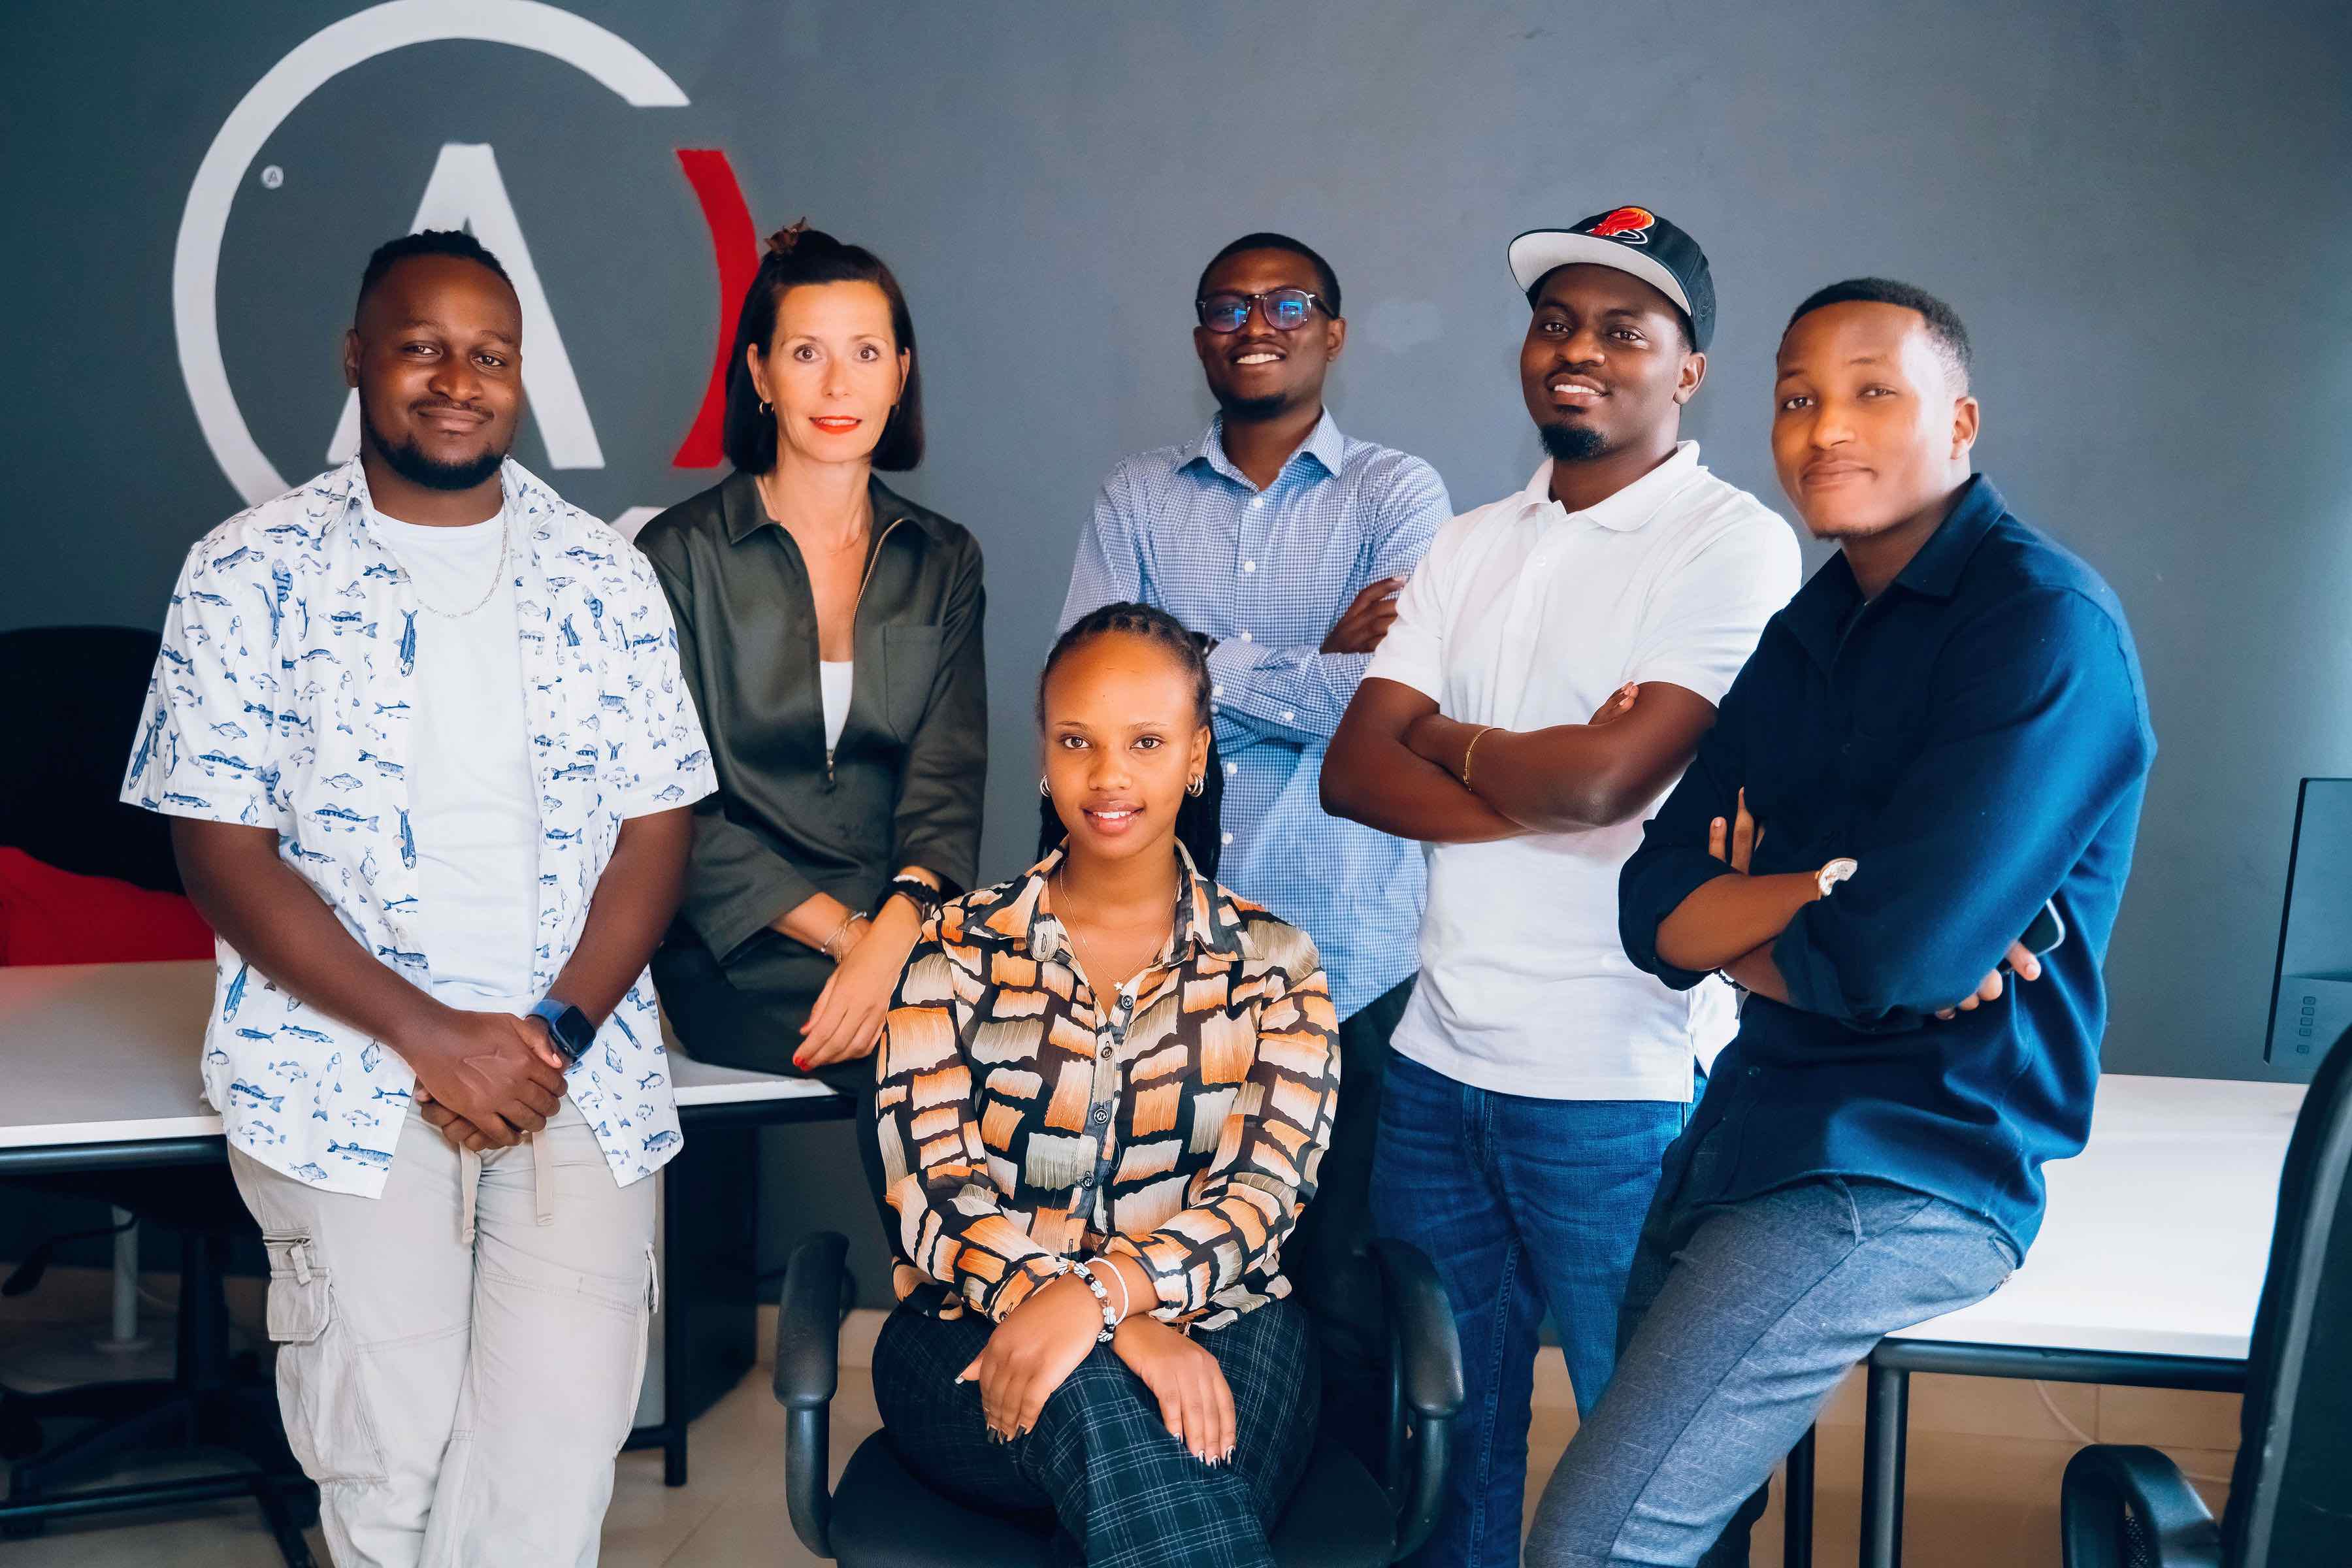 MD Anja Schlösser and part of the African Software Engineers. A look at this new talent pool opens many opportunities.